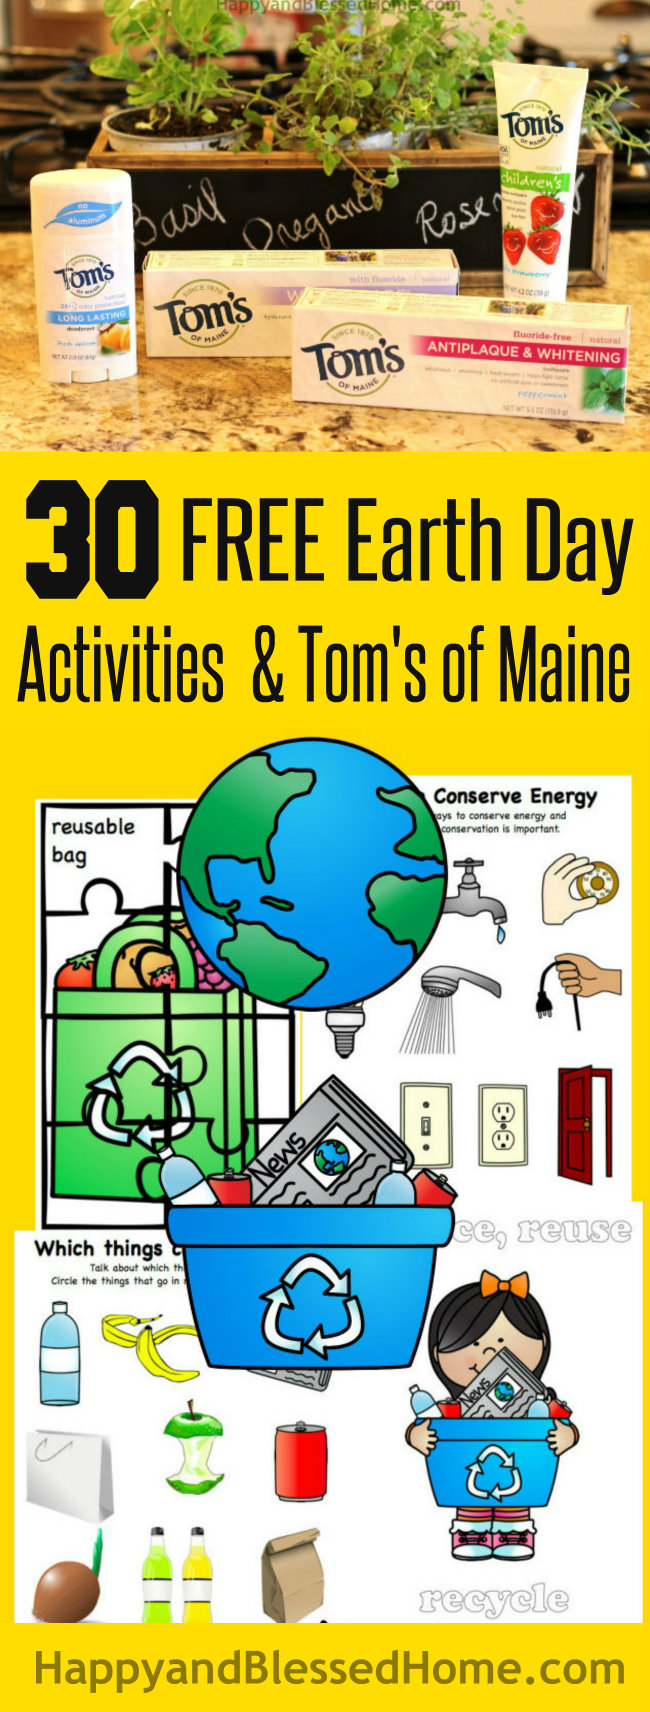 Fun 30 FREE Earth Day Activities for Kids and FREE Coloring Book from Tom's of Maine from HappyandBlessedHome.com